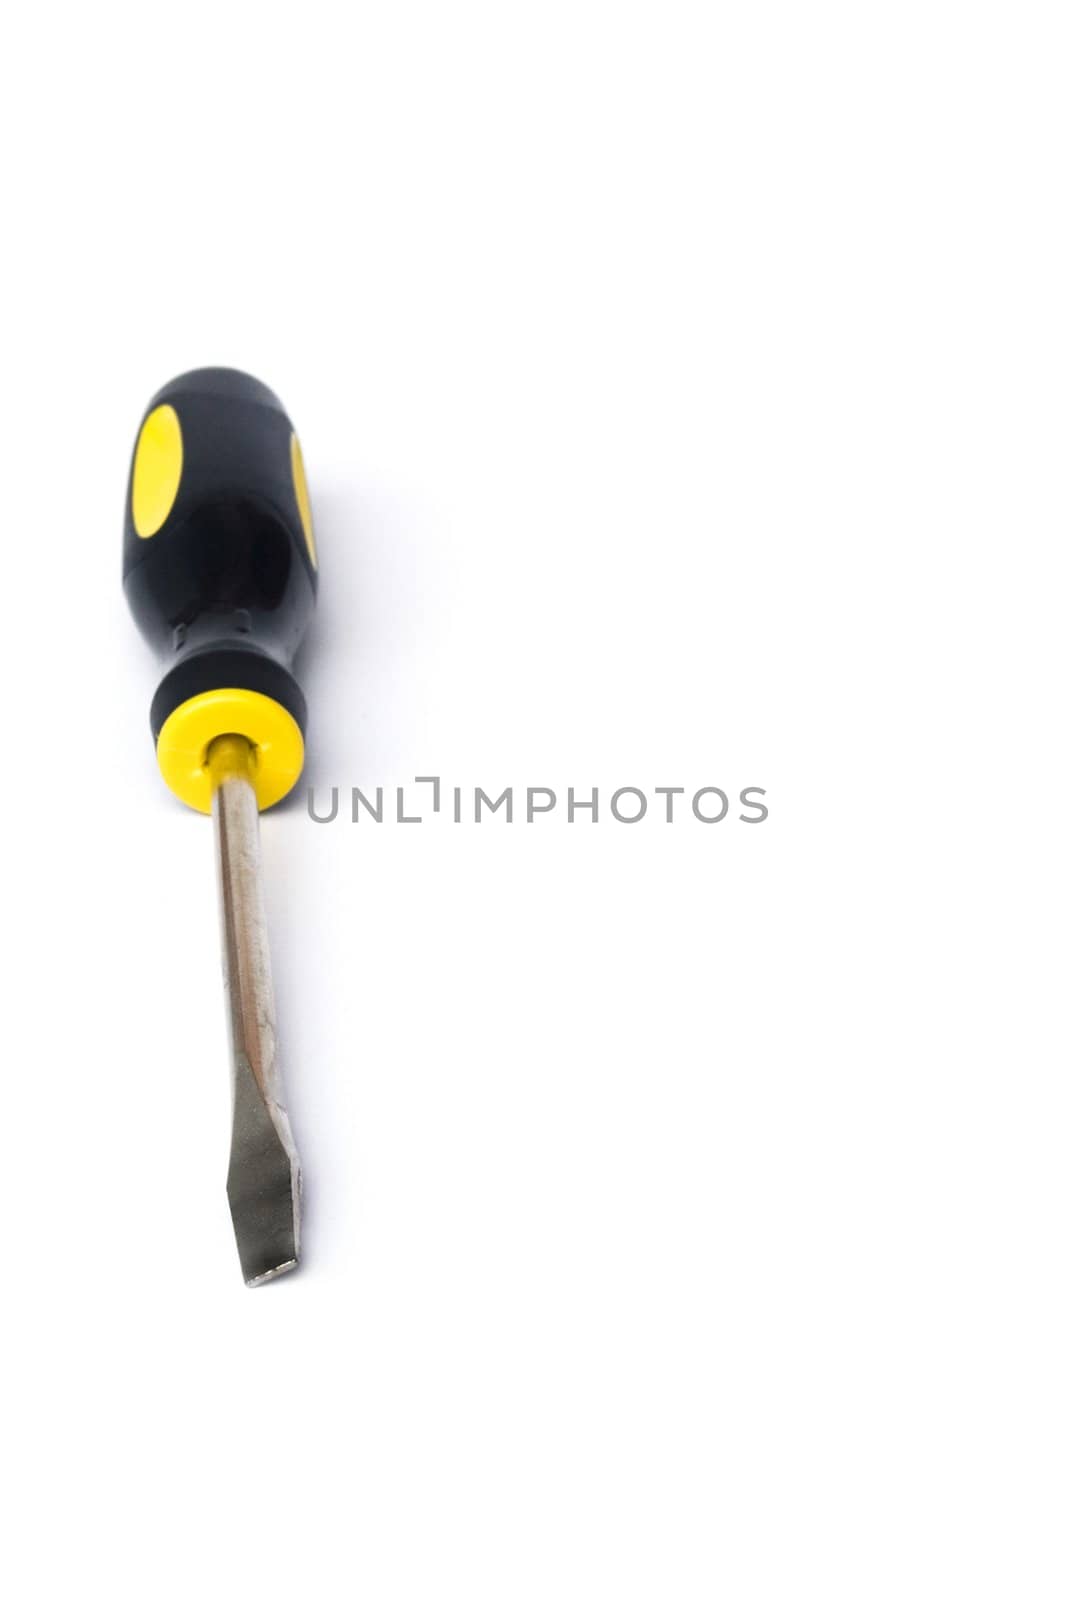 Yellow and black handled screwdriver on white background